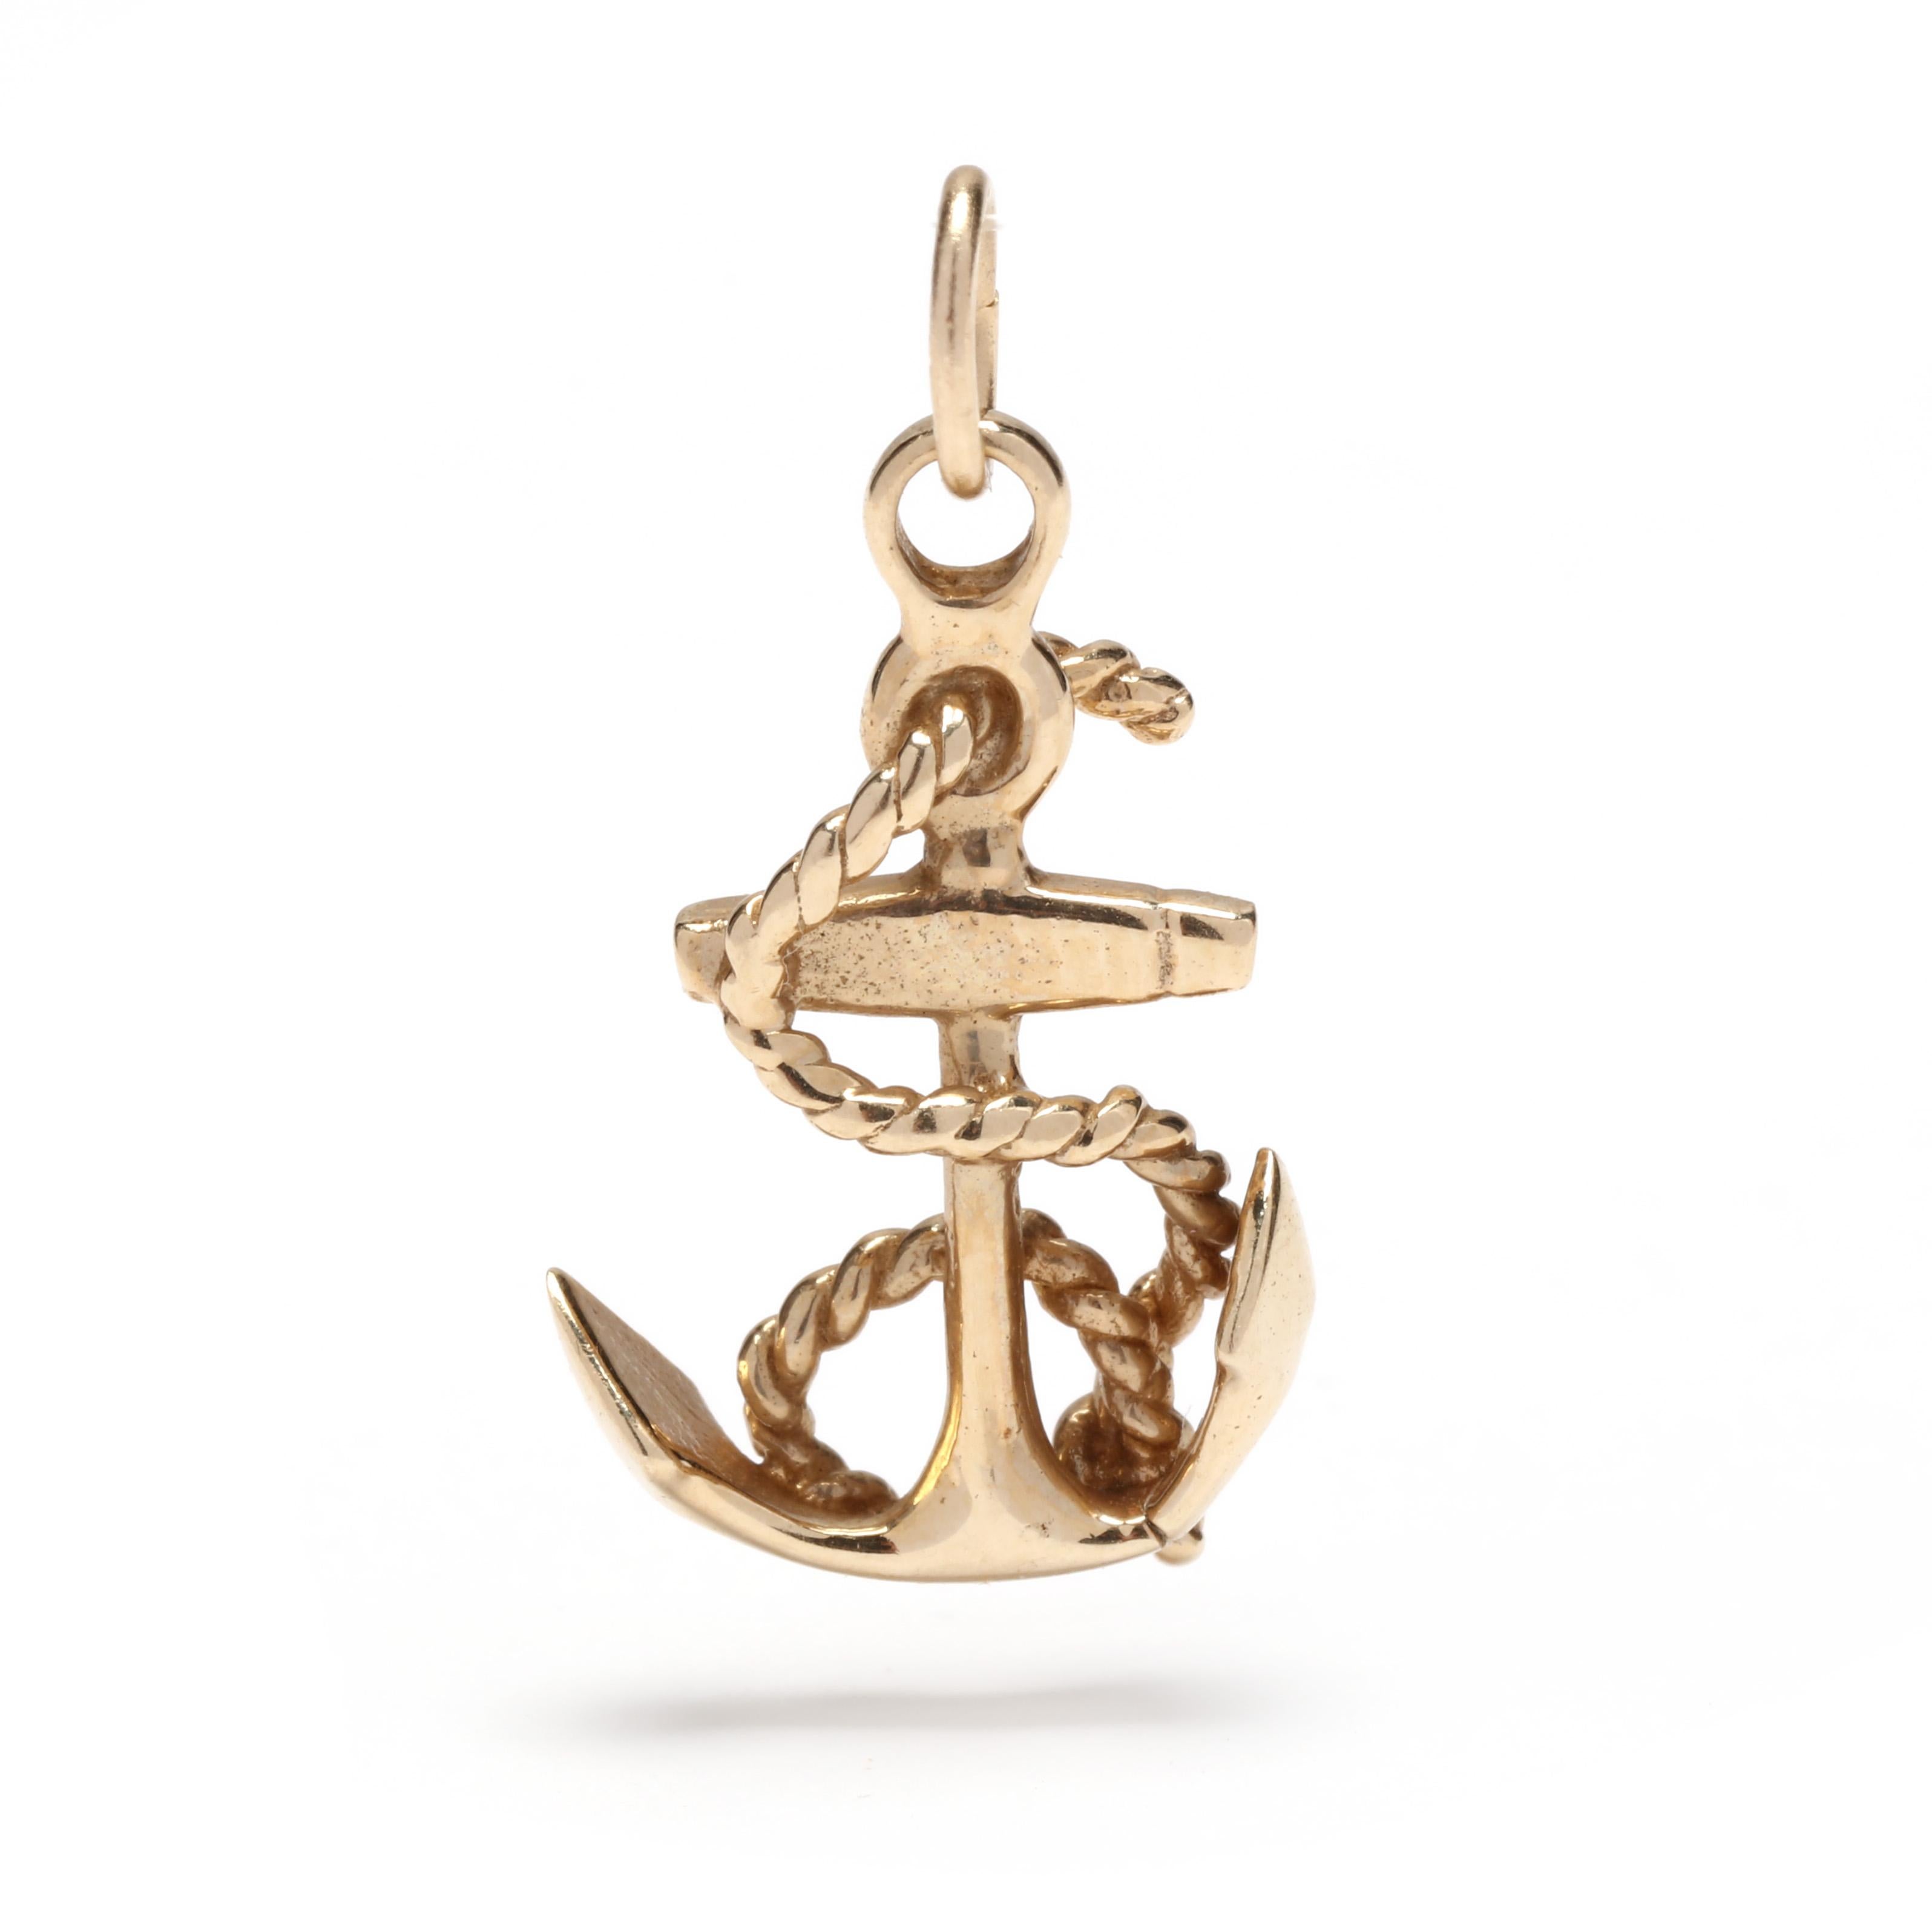 A vintage 14 karat yellow gold mini anchor charm. This saline charm features a small polished anchor motif with a coiled rope motif throughout and with a thin bail.

Length: 7/8 in.

Width: 1/2 in.

Weight: 1.1 dwts. / 1.71 grams

Metal: Tested